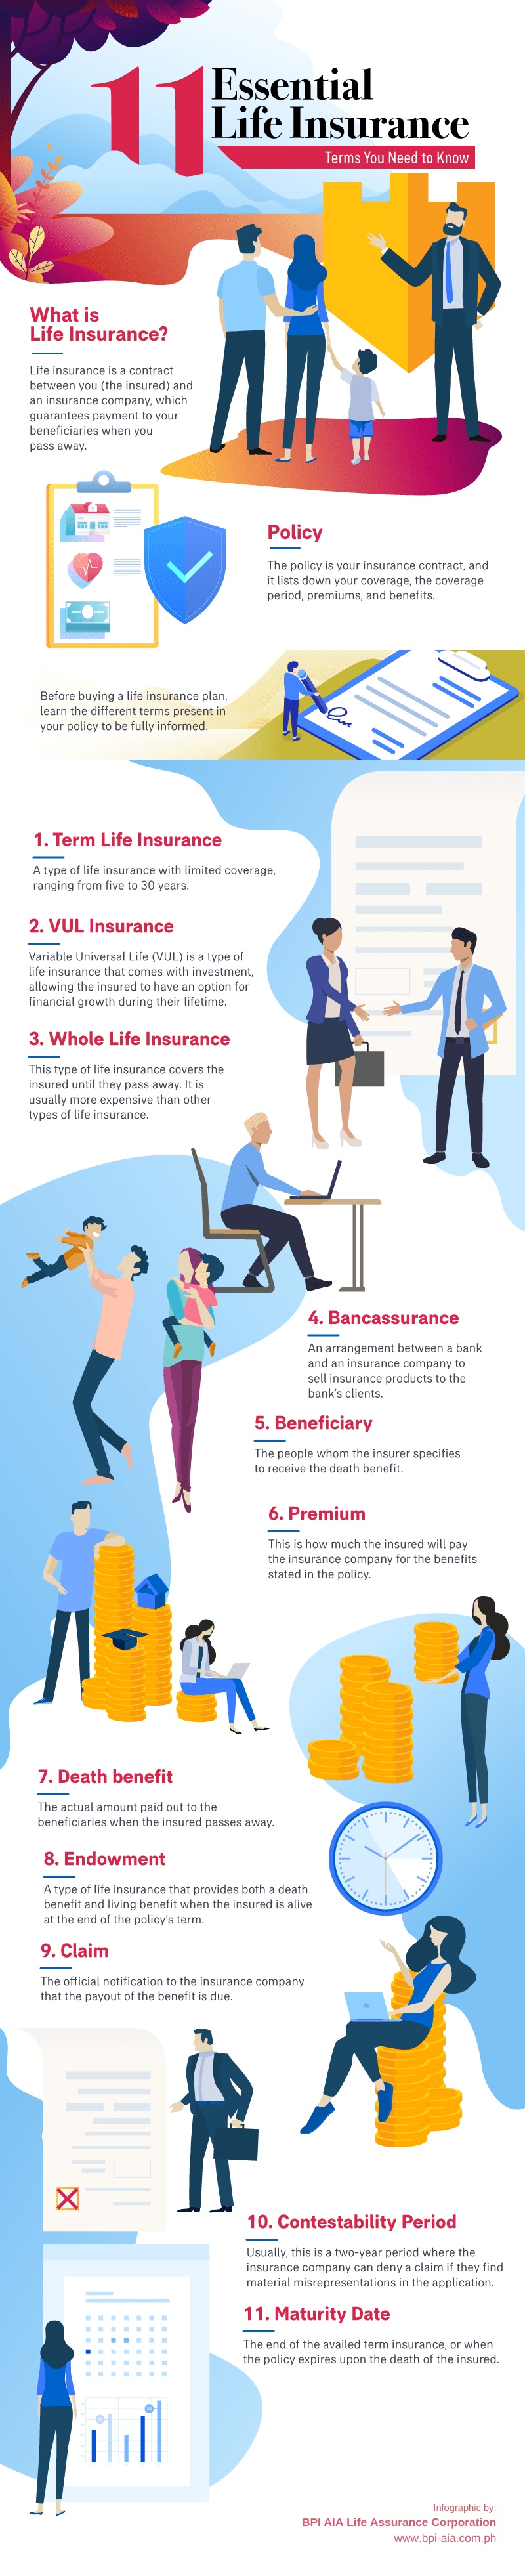 11 Essential Life Insurance Terms You Need to Know